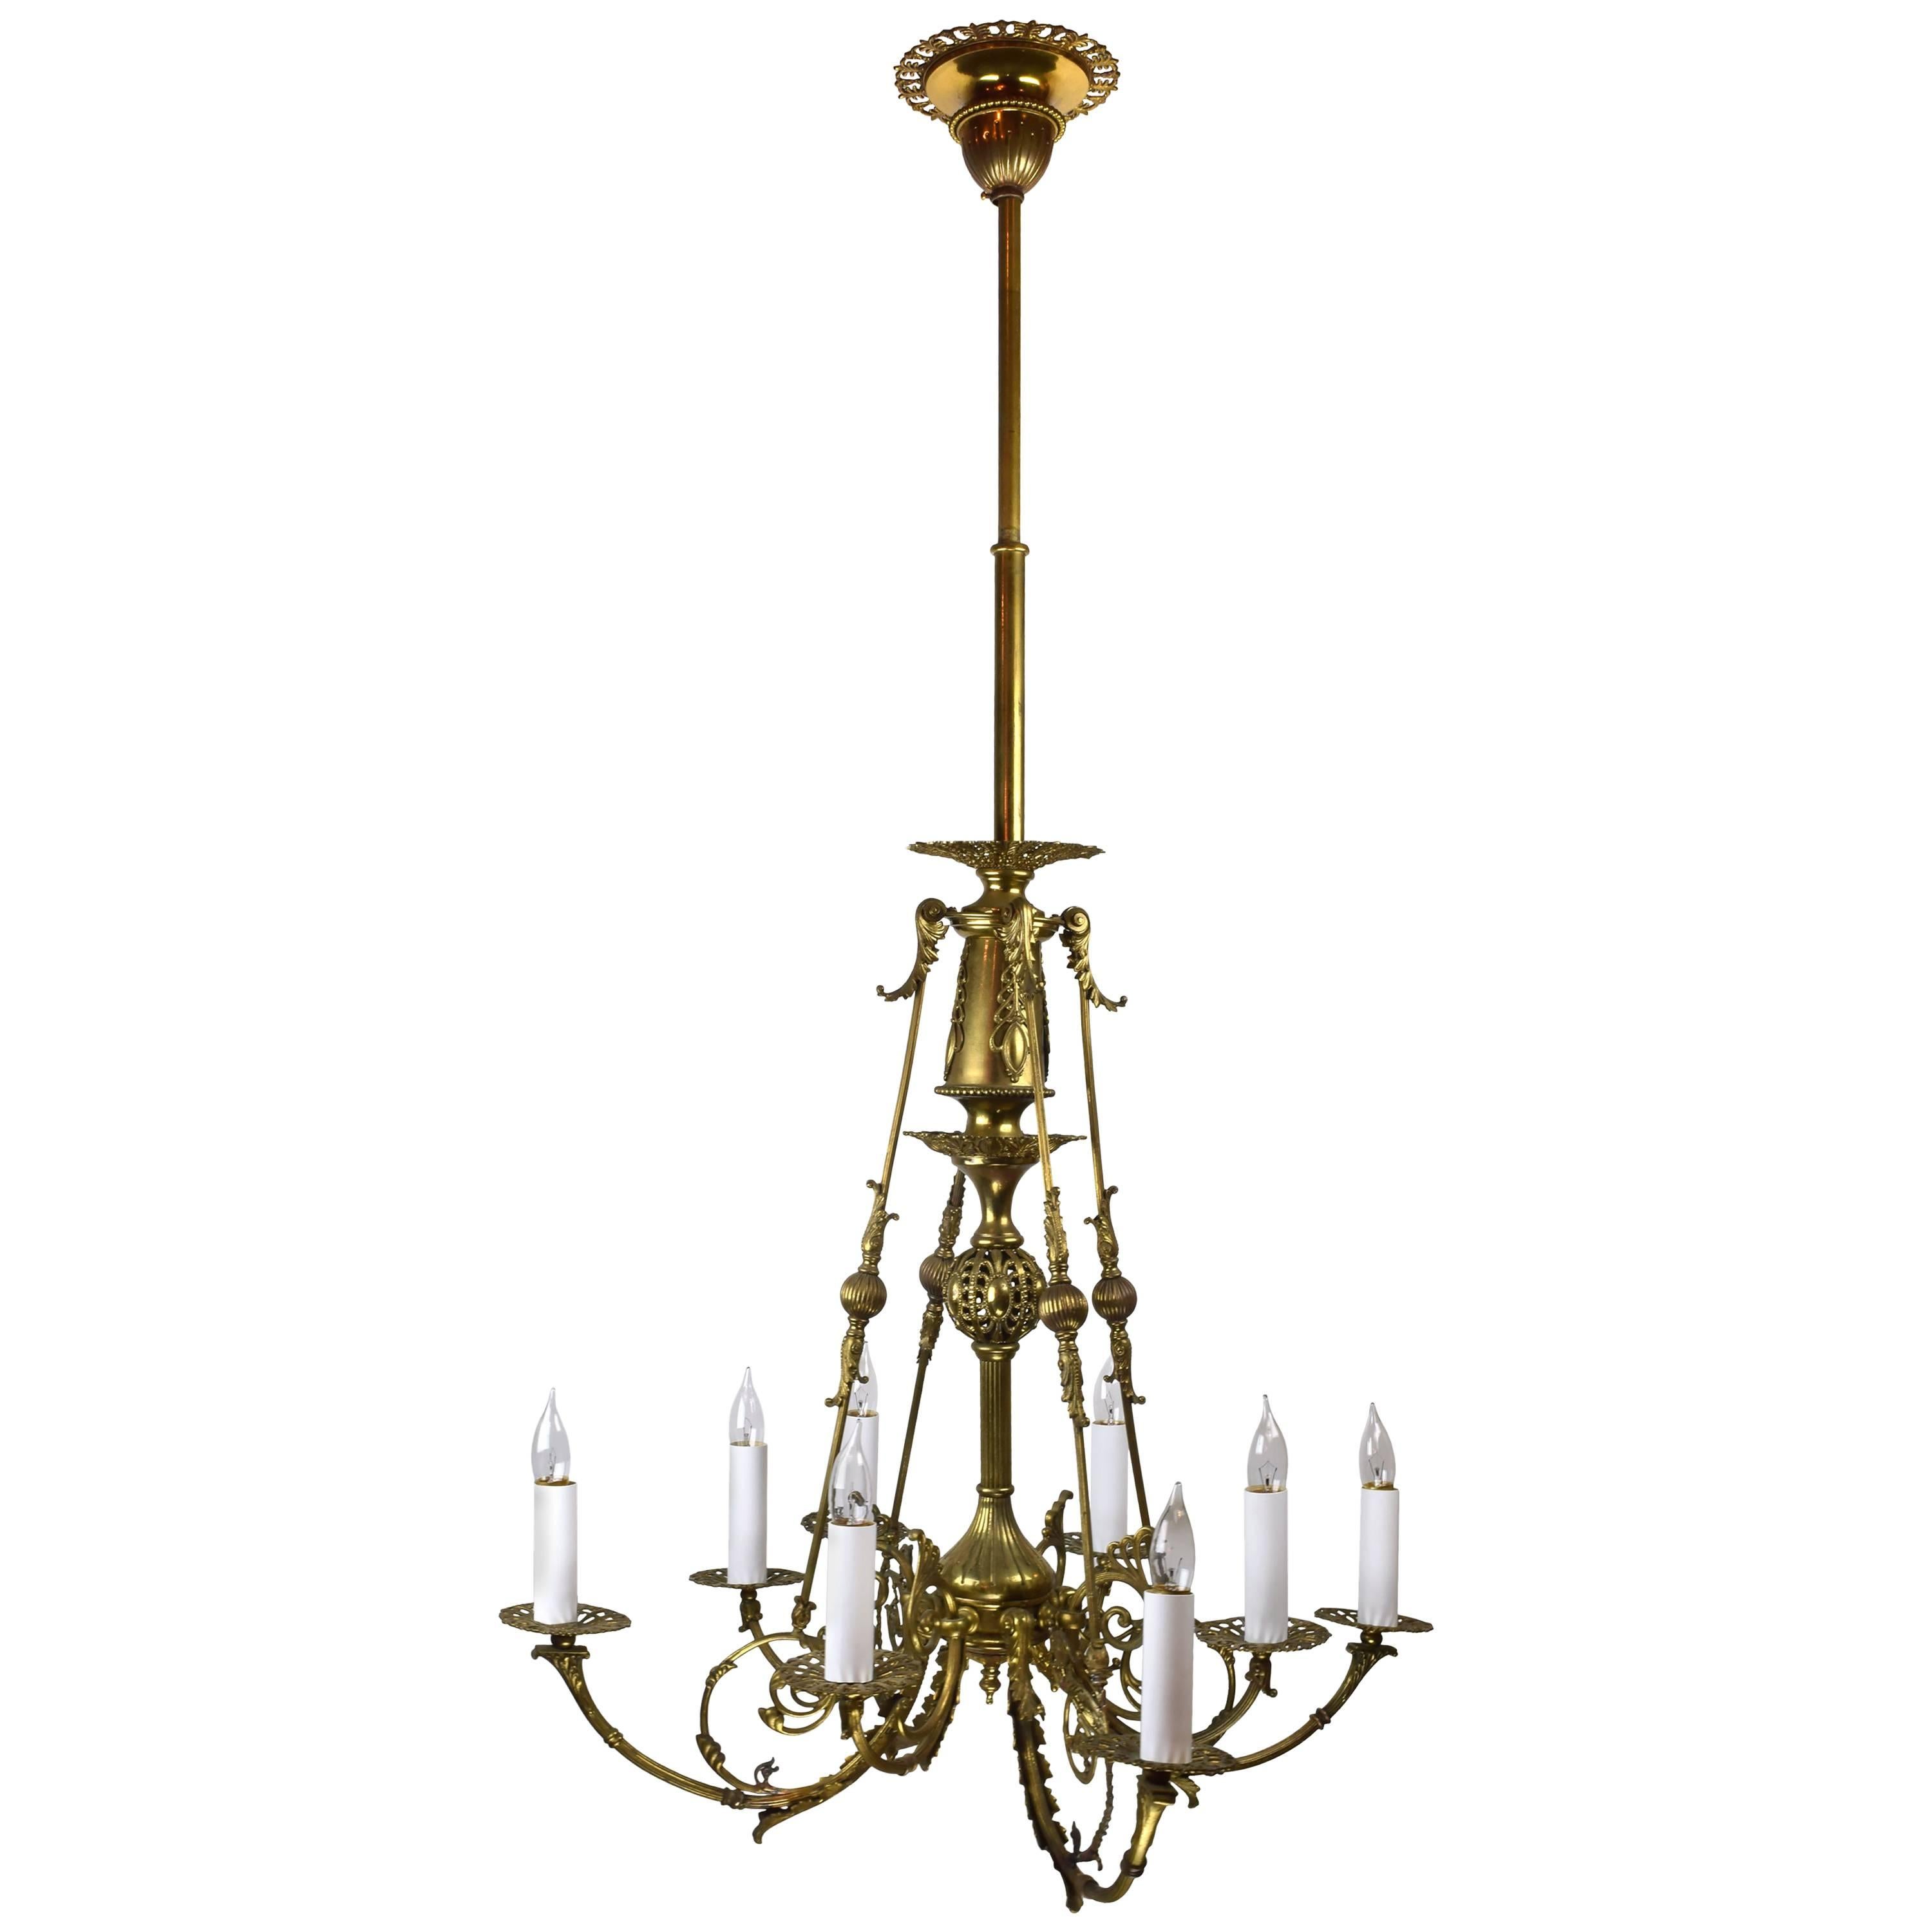 Early 20th Century Brass Aesthetic Movement Chandelier